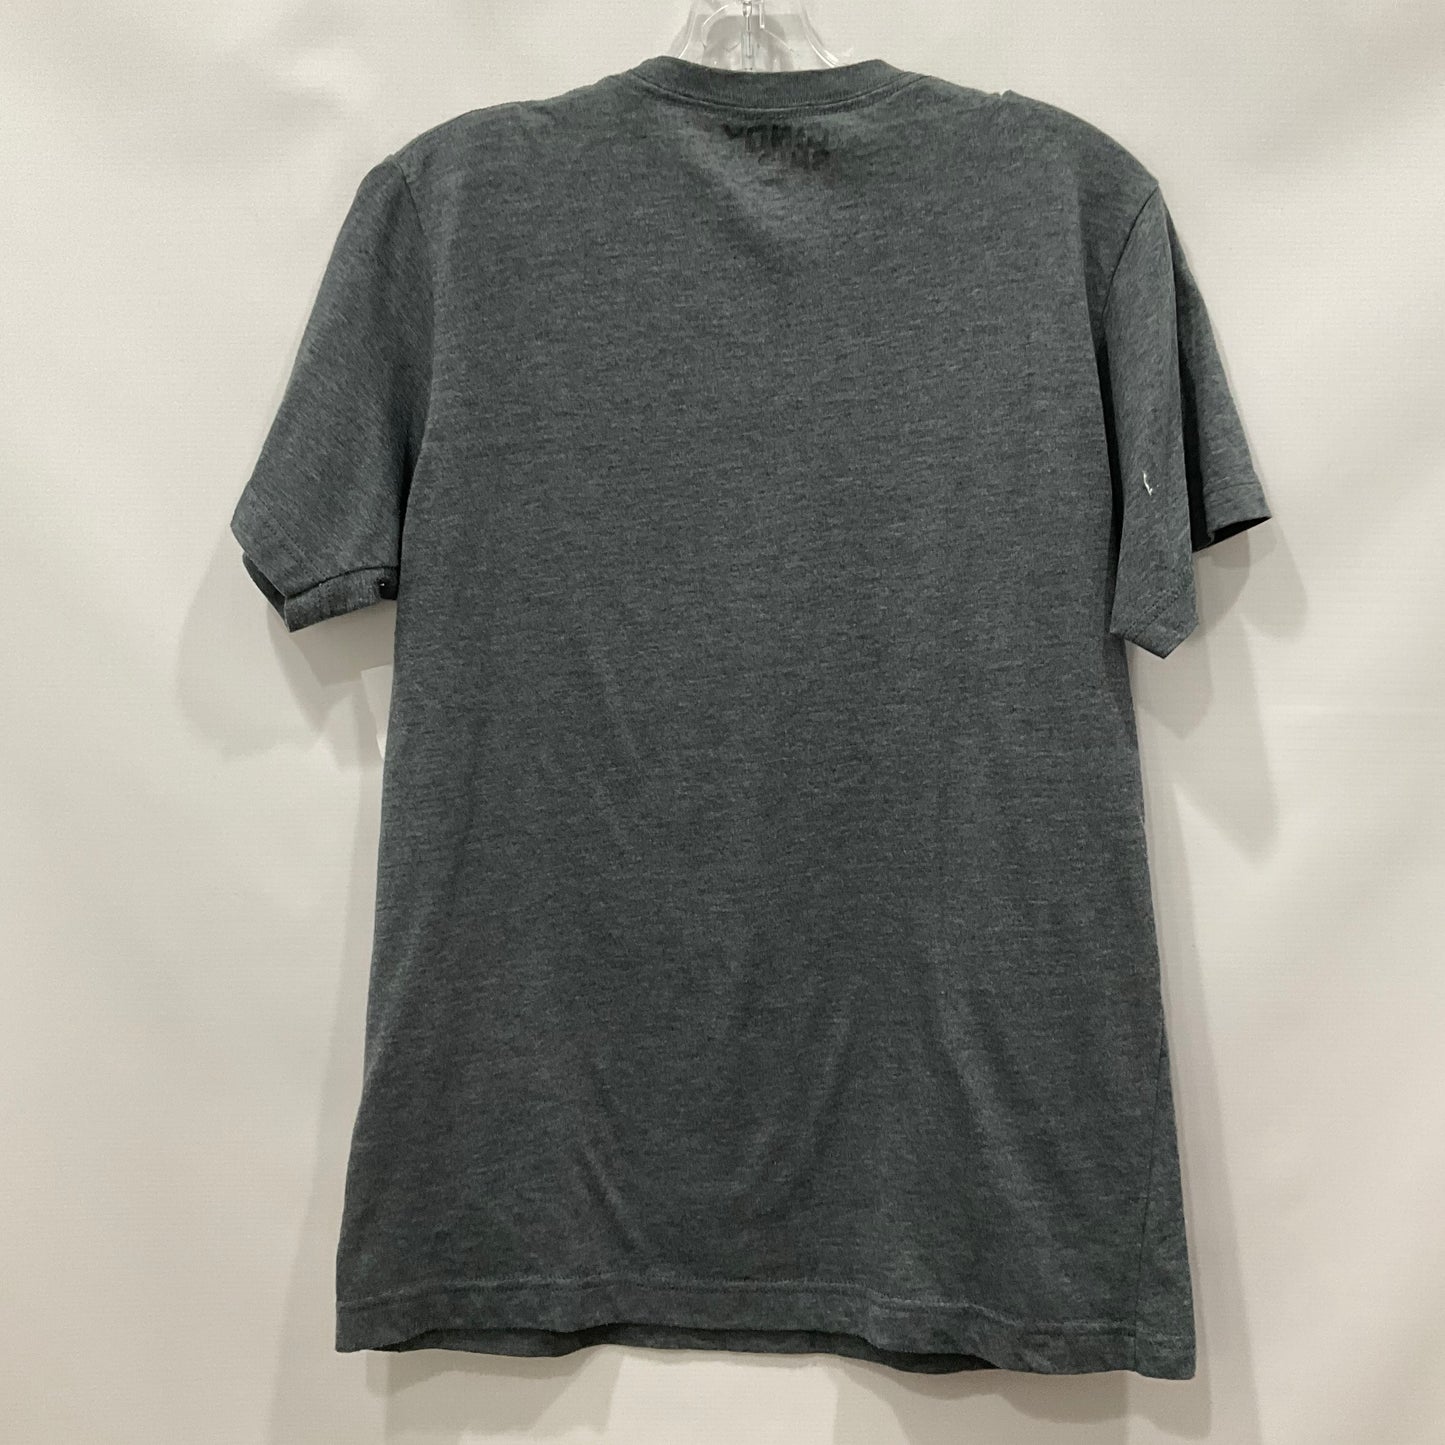 Top Short Sleeve By Cincy Shirts Size: M